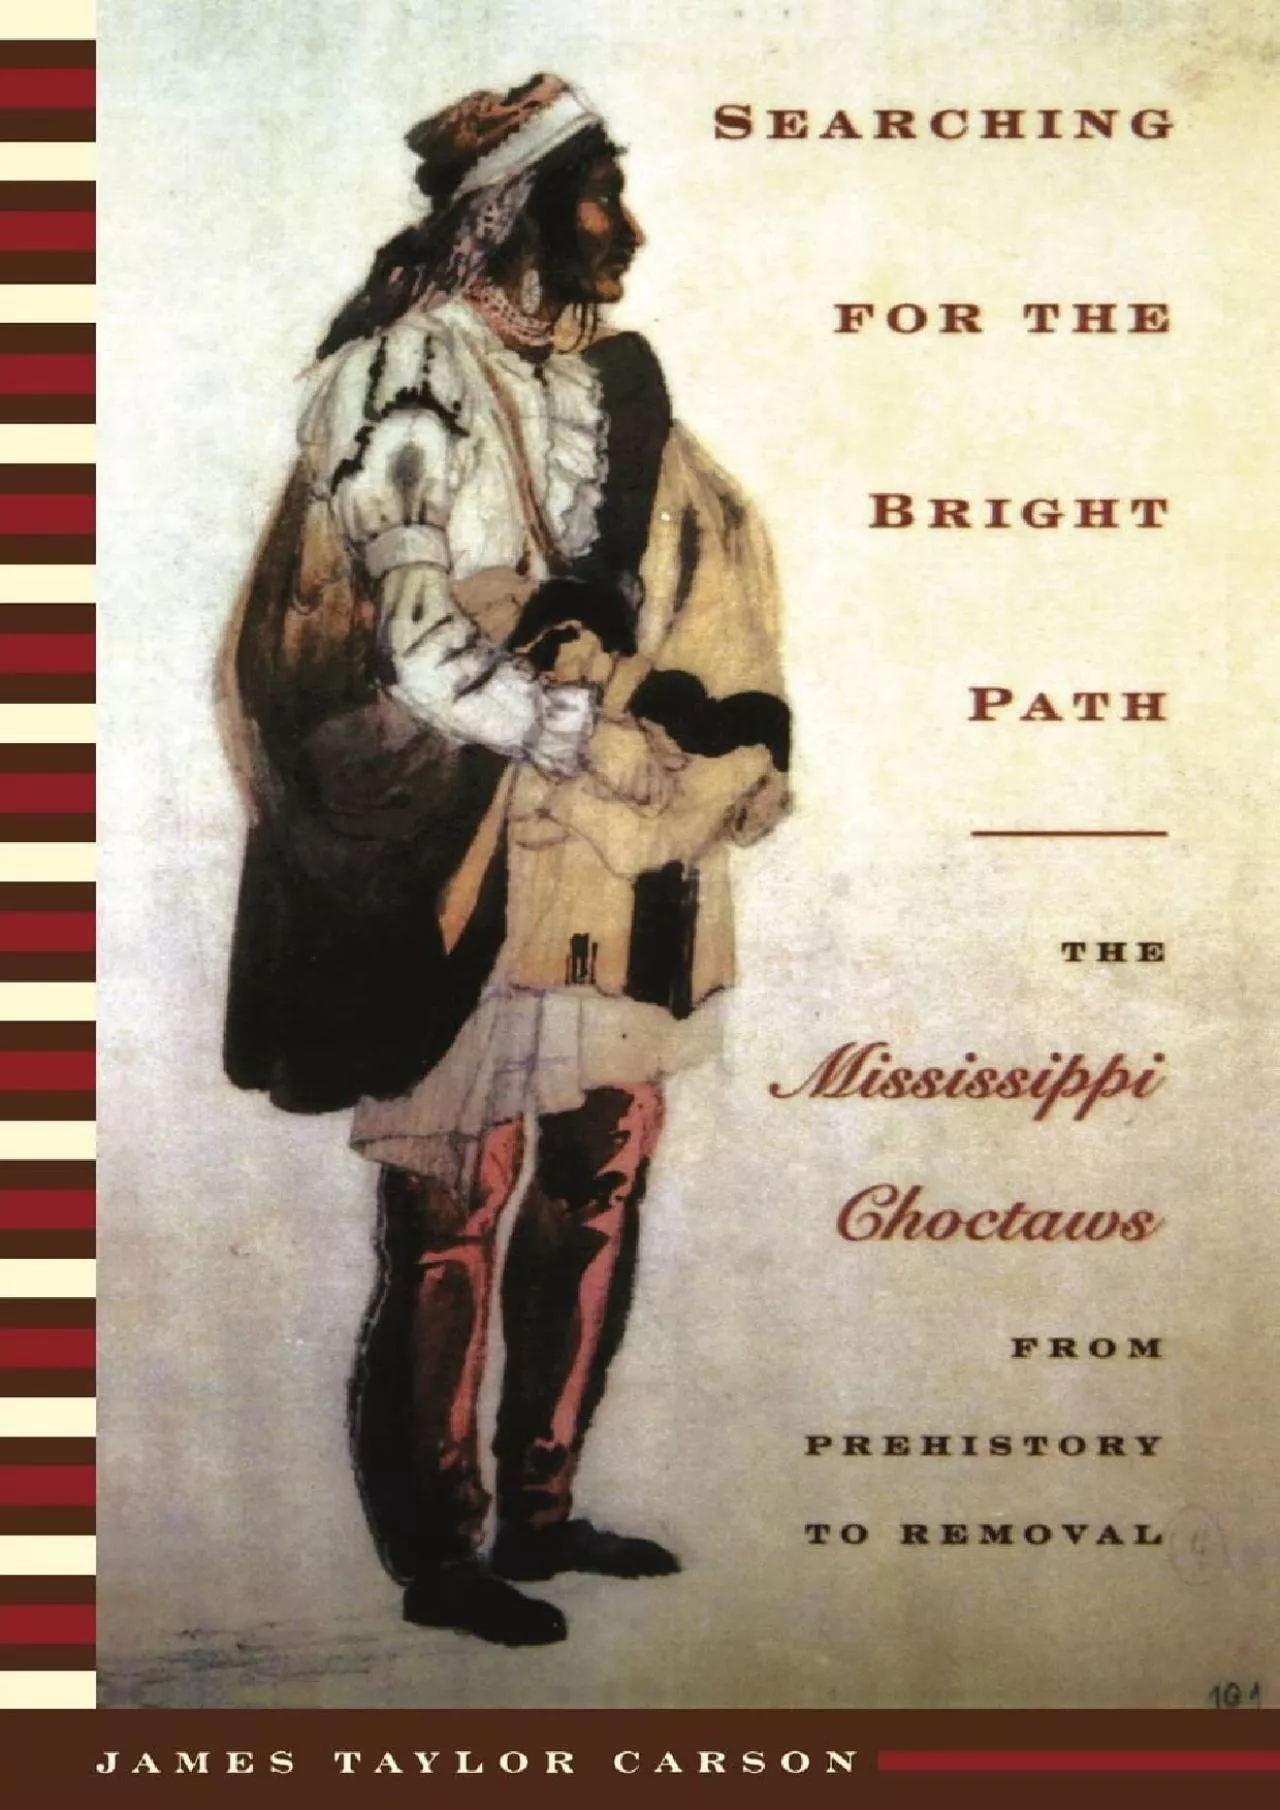 (BOOK)-Searching for the Bright Path: The Mississippi Choctaws from Prehistory to Removal